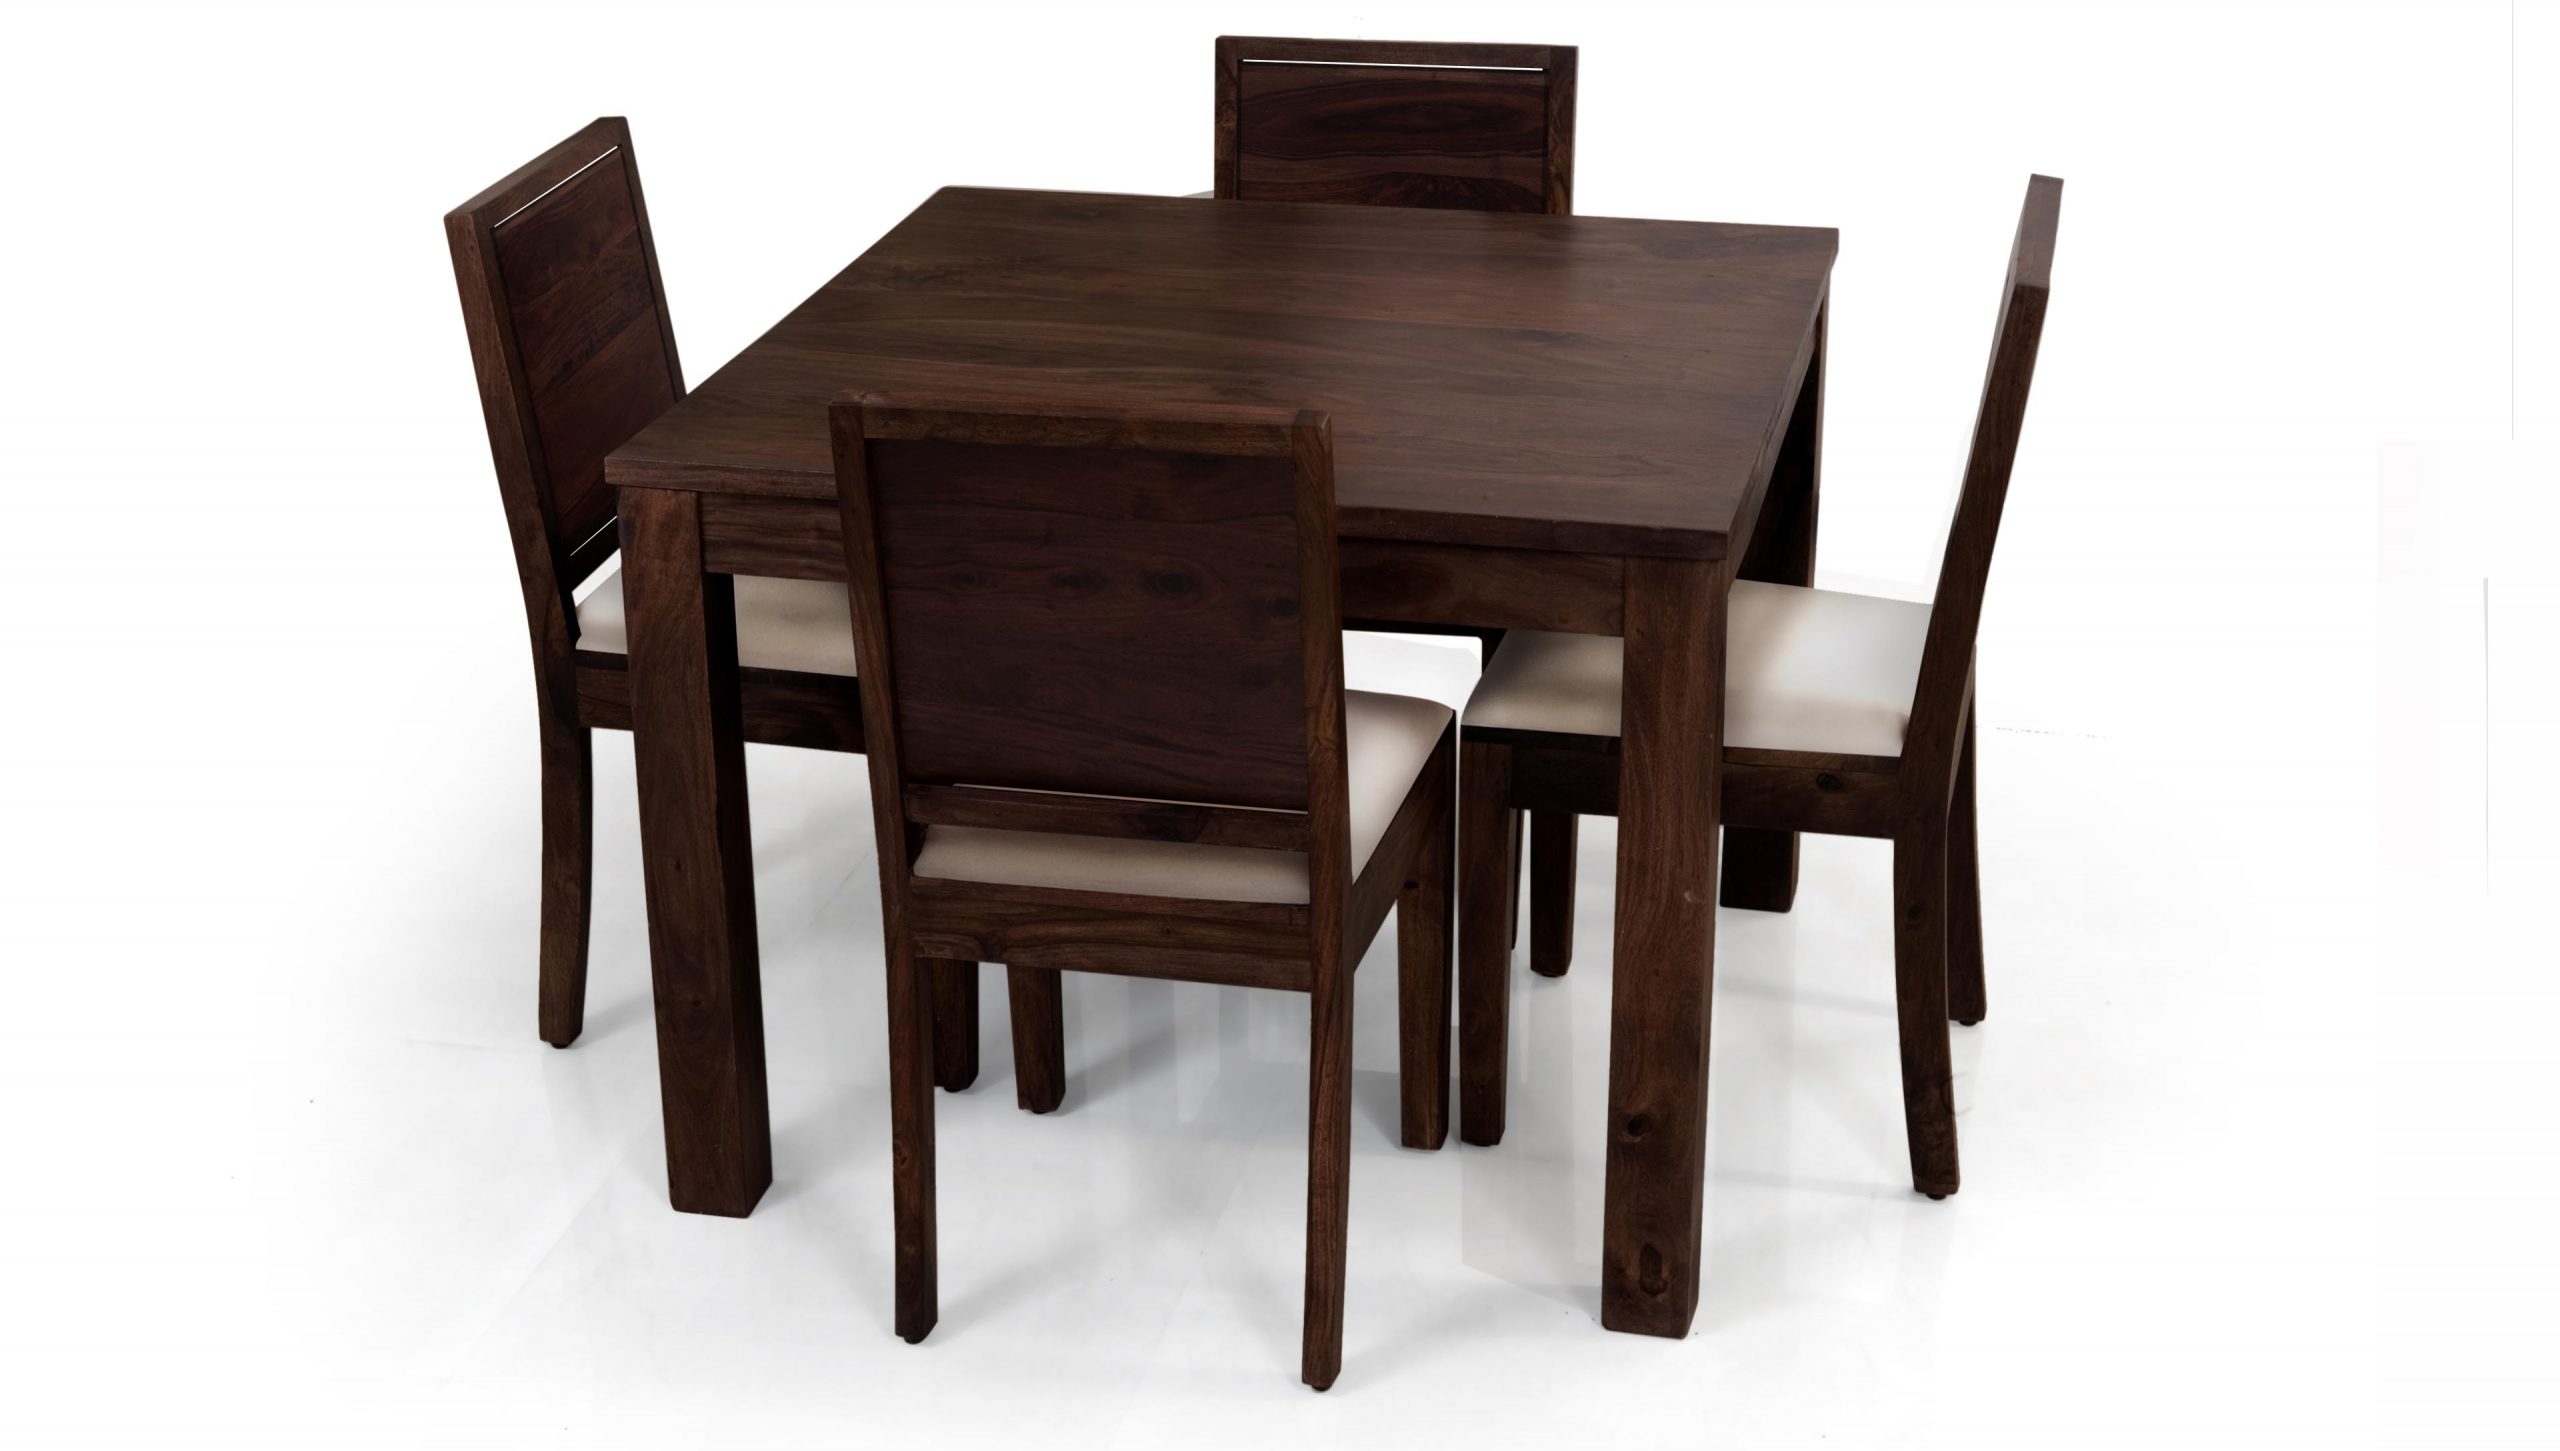 Chair Awesome Small Dining Table With Chairs within sizing 3840 X 2176